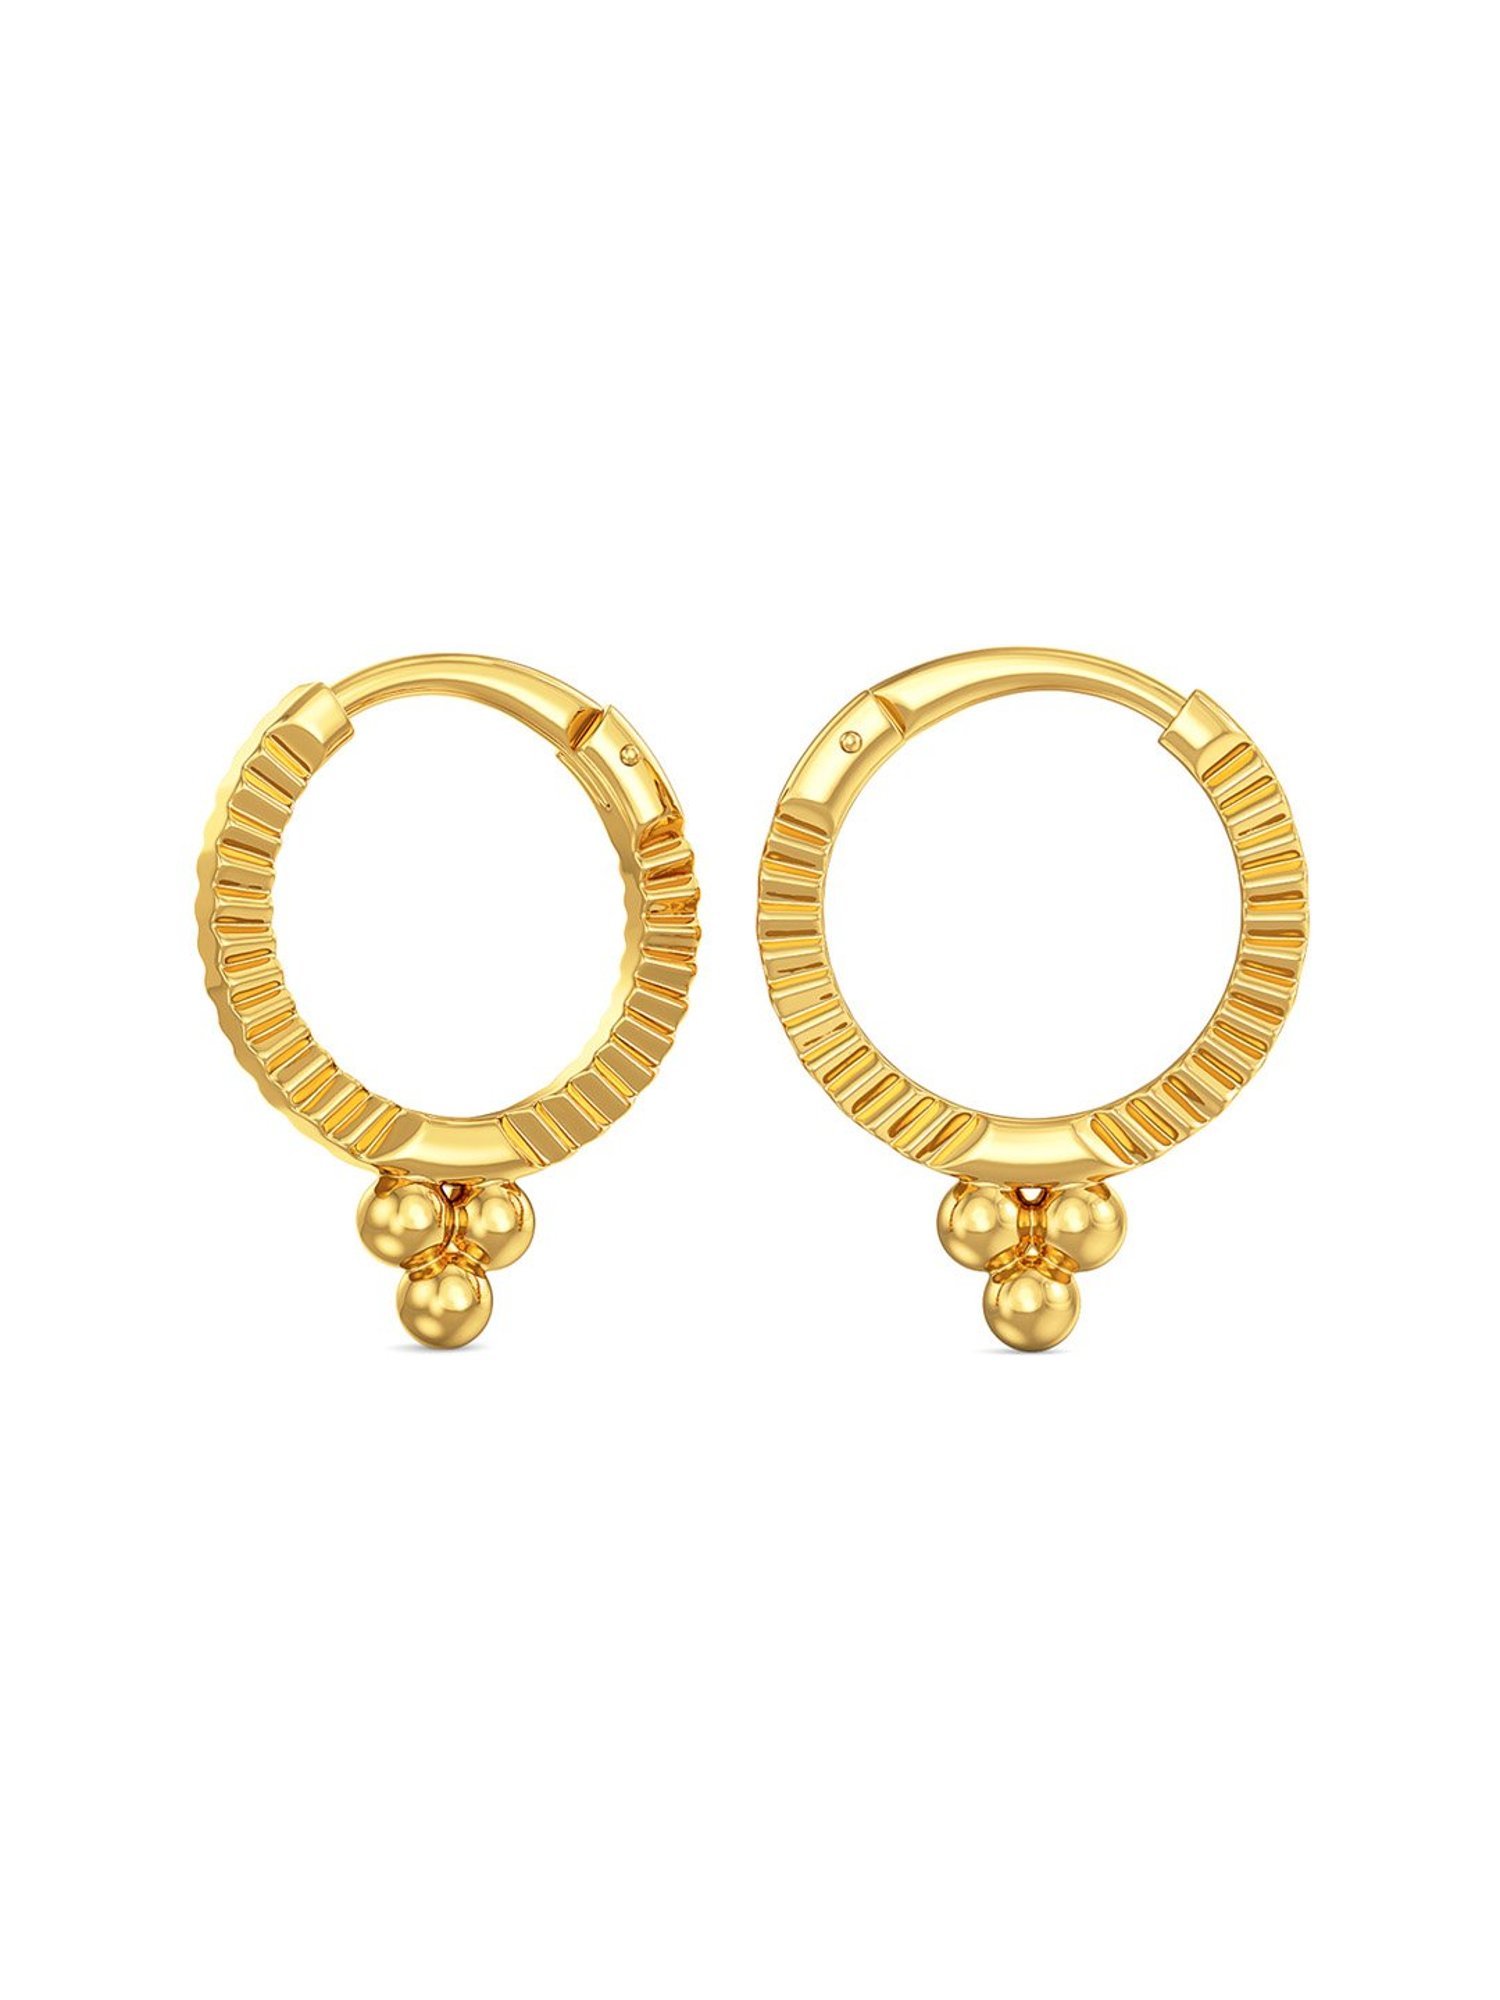 Tiny Flower Earrings in Solid Gold - Tales In Gold